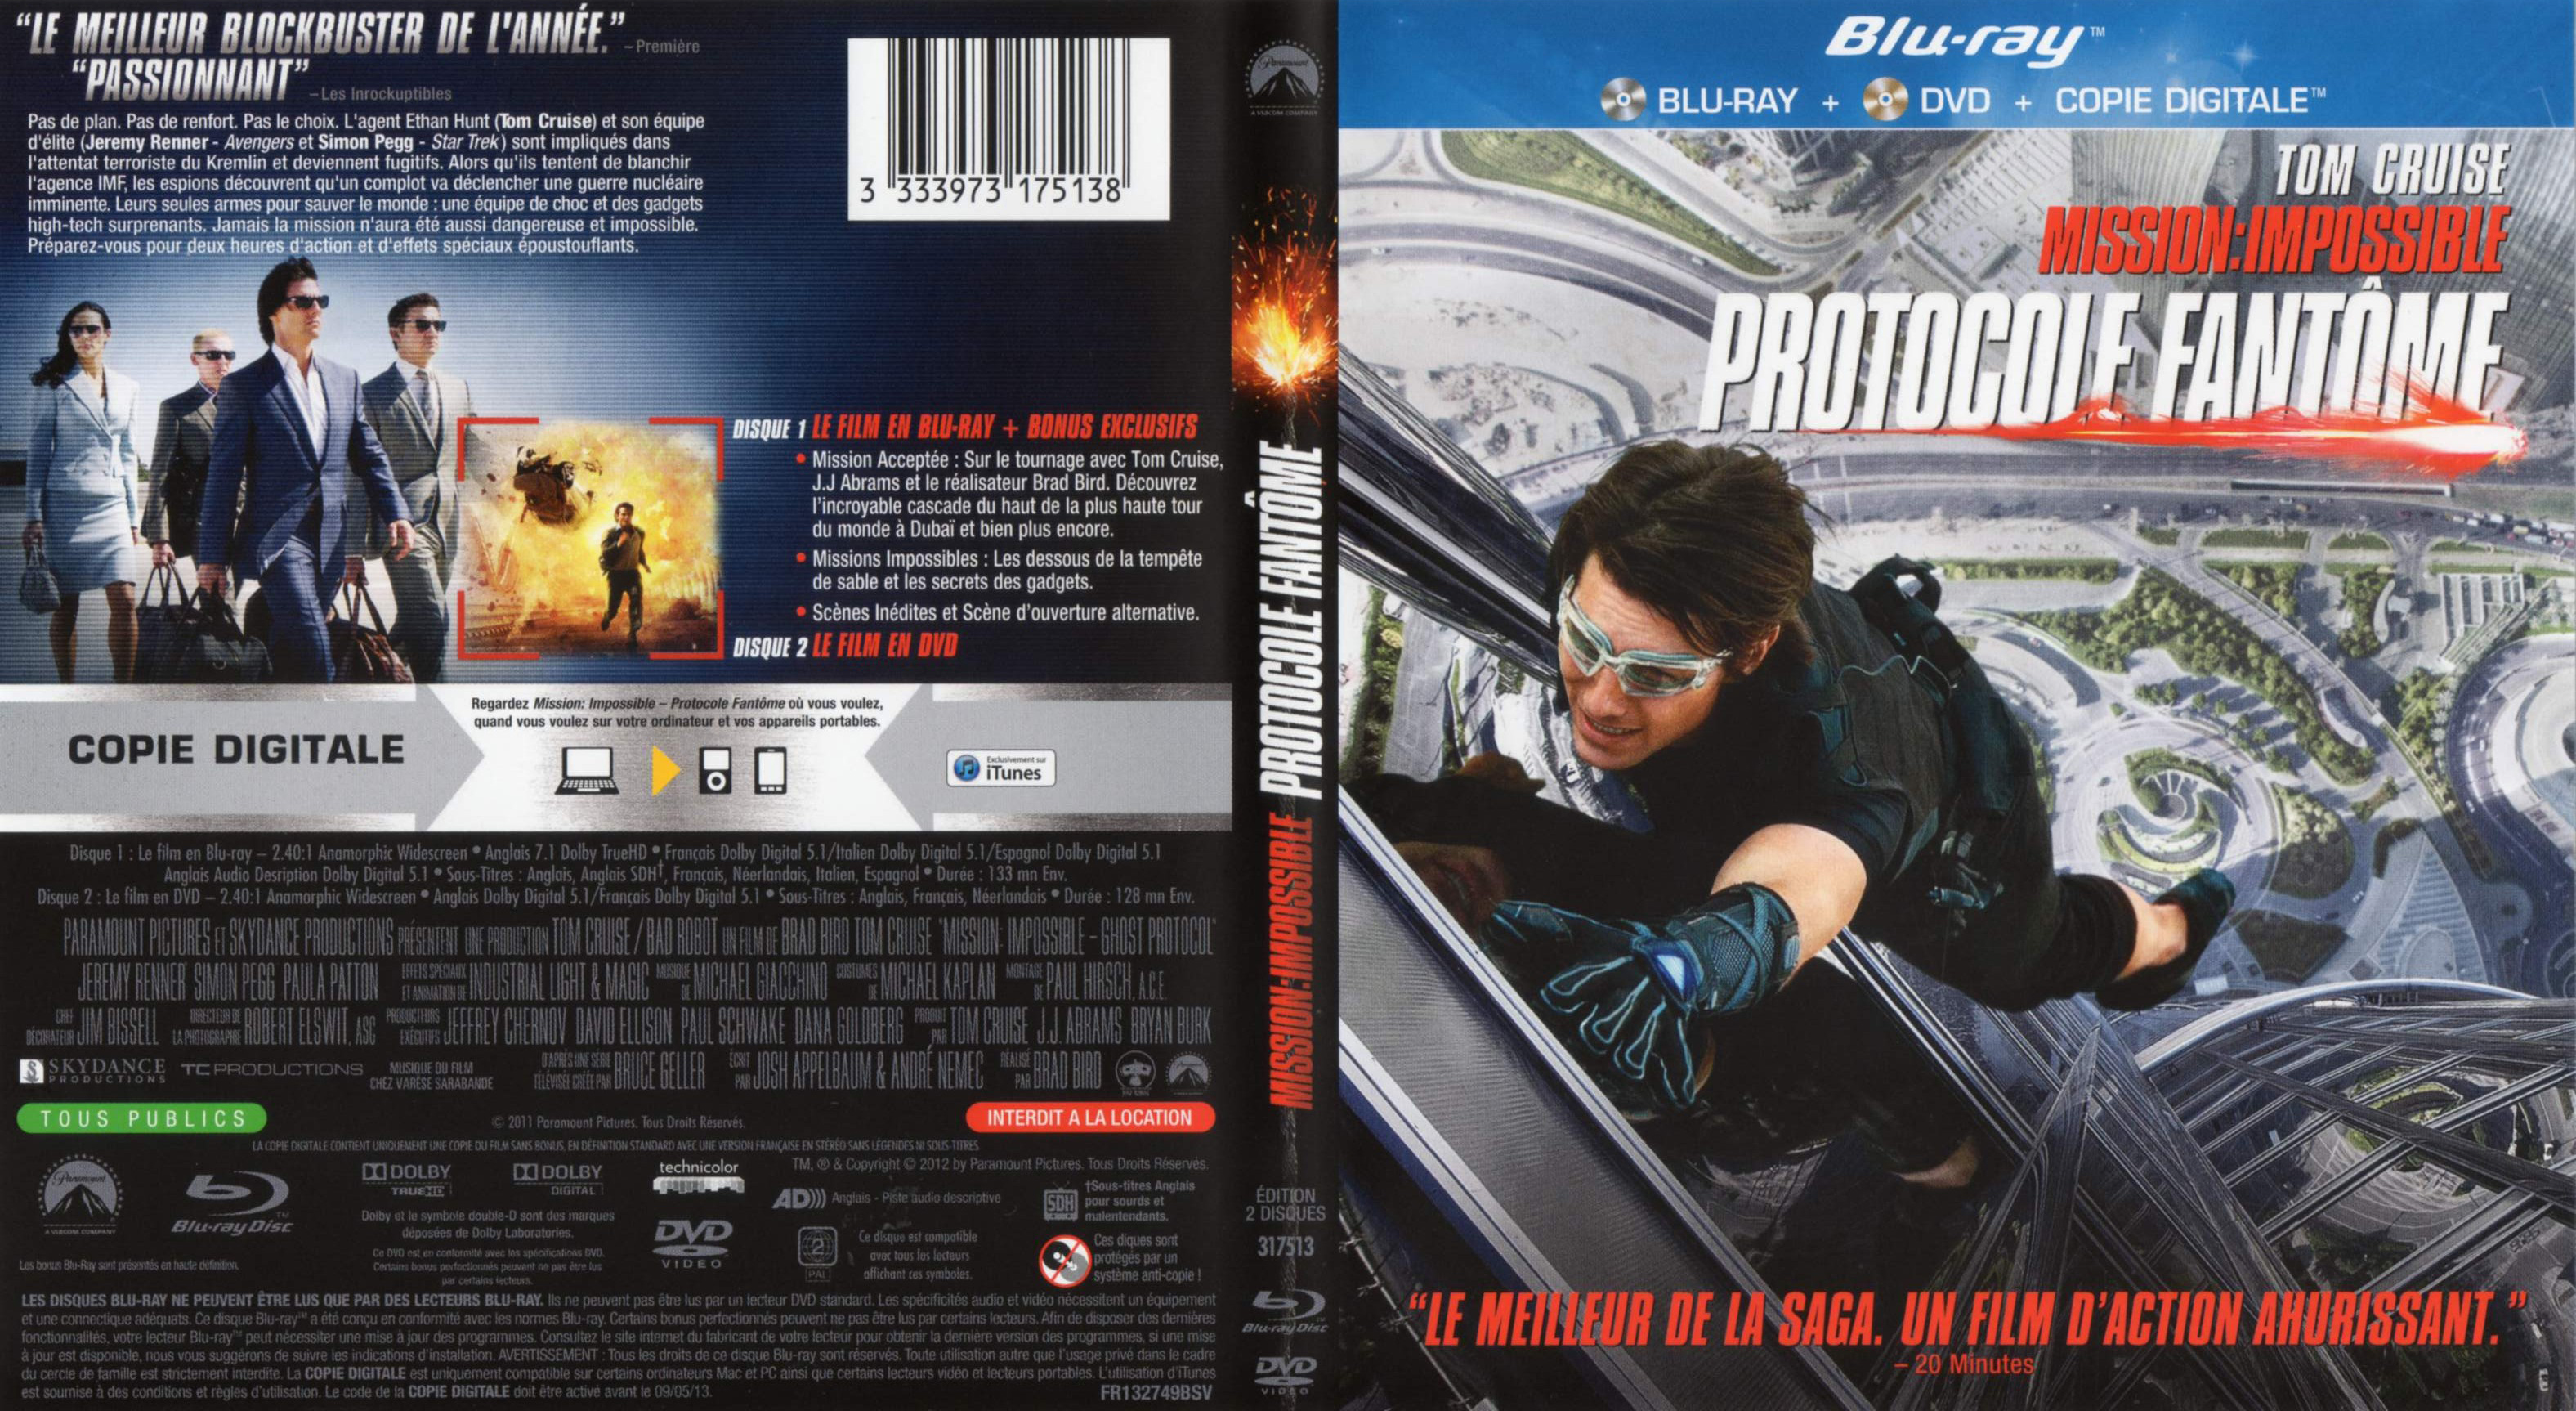 Jaquette DVD Mission Impossible Protocole fantme (BLU-RAY)